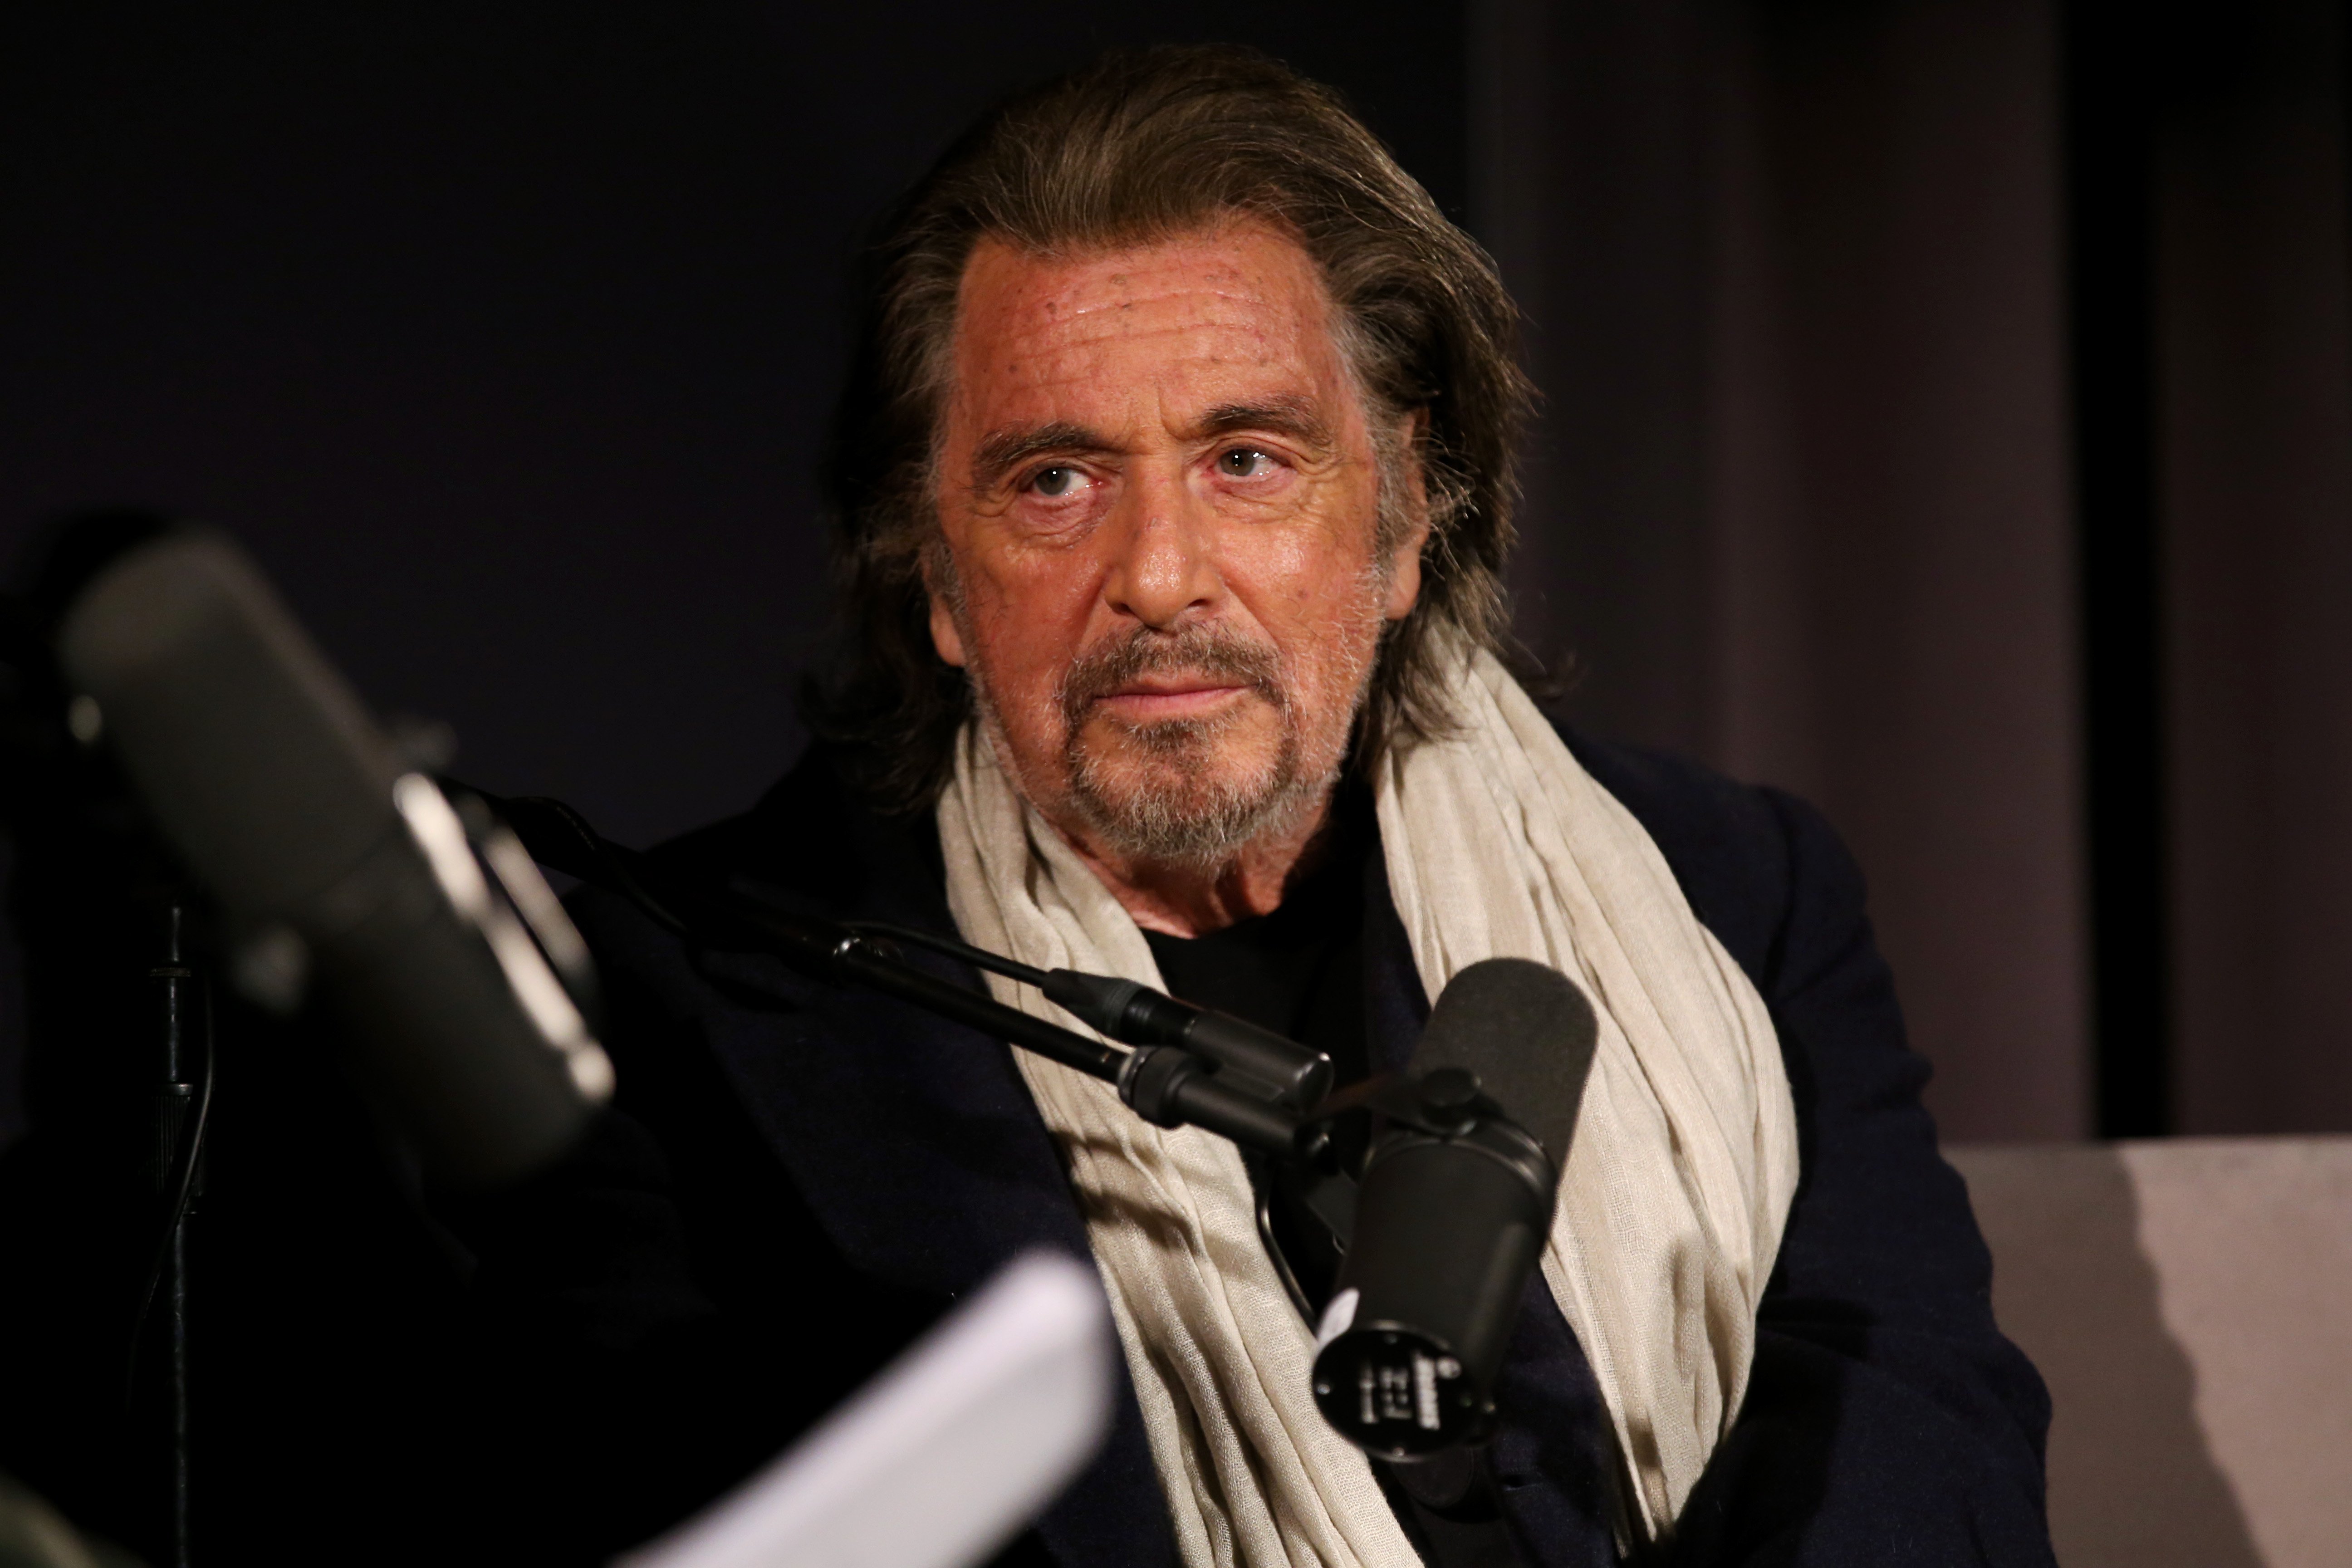 Al Pacino speaks onstage during The Hollywood Reporter Awards Chatter Live with Al Pacino at DGA Theater on December 05, 2019, in Los Angeles, California. | Source: Getty Images.